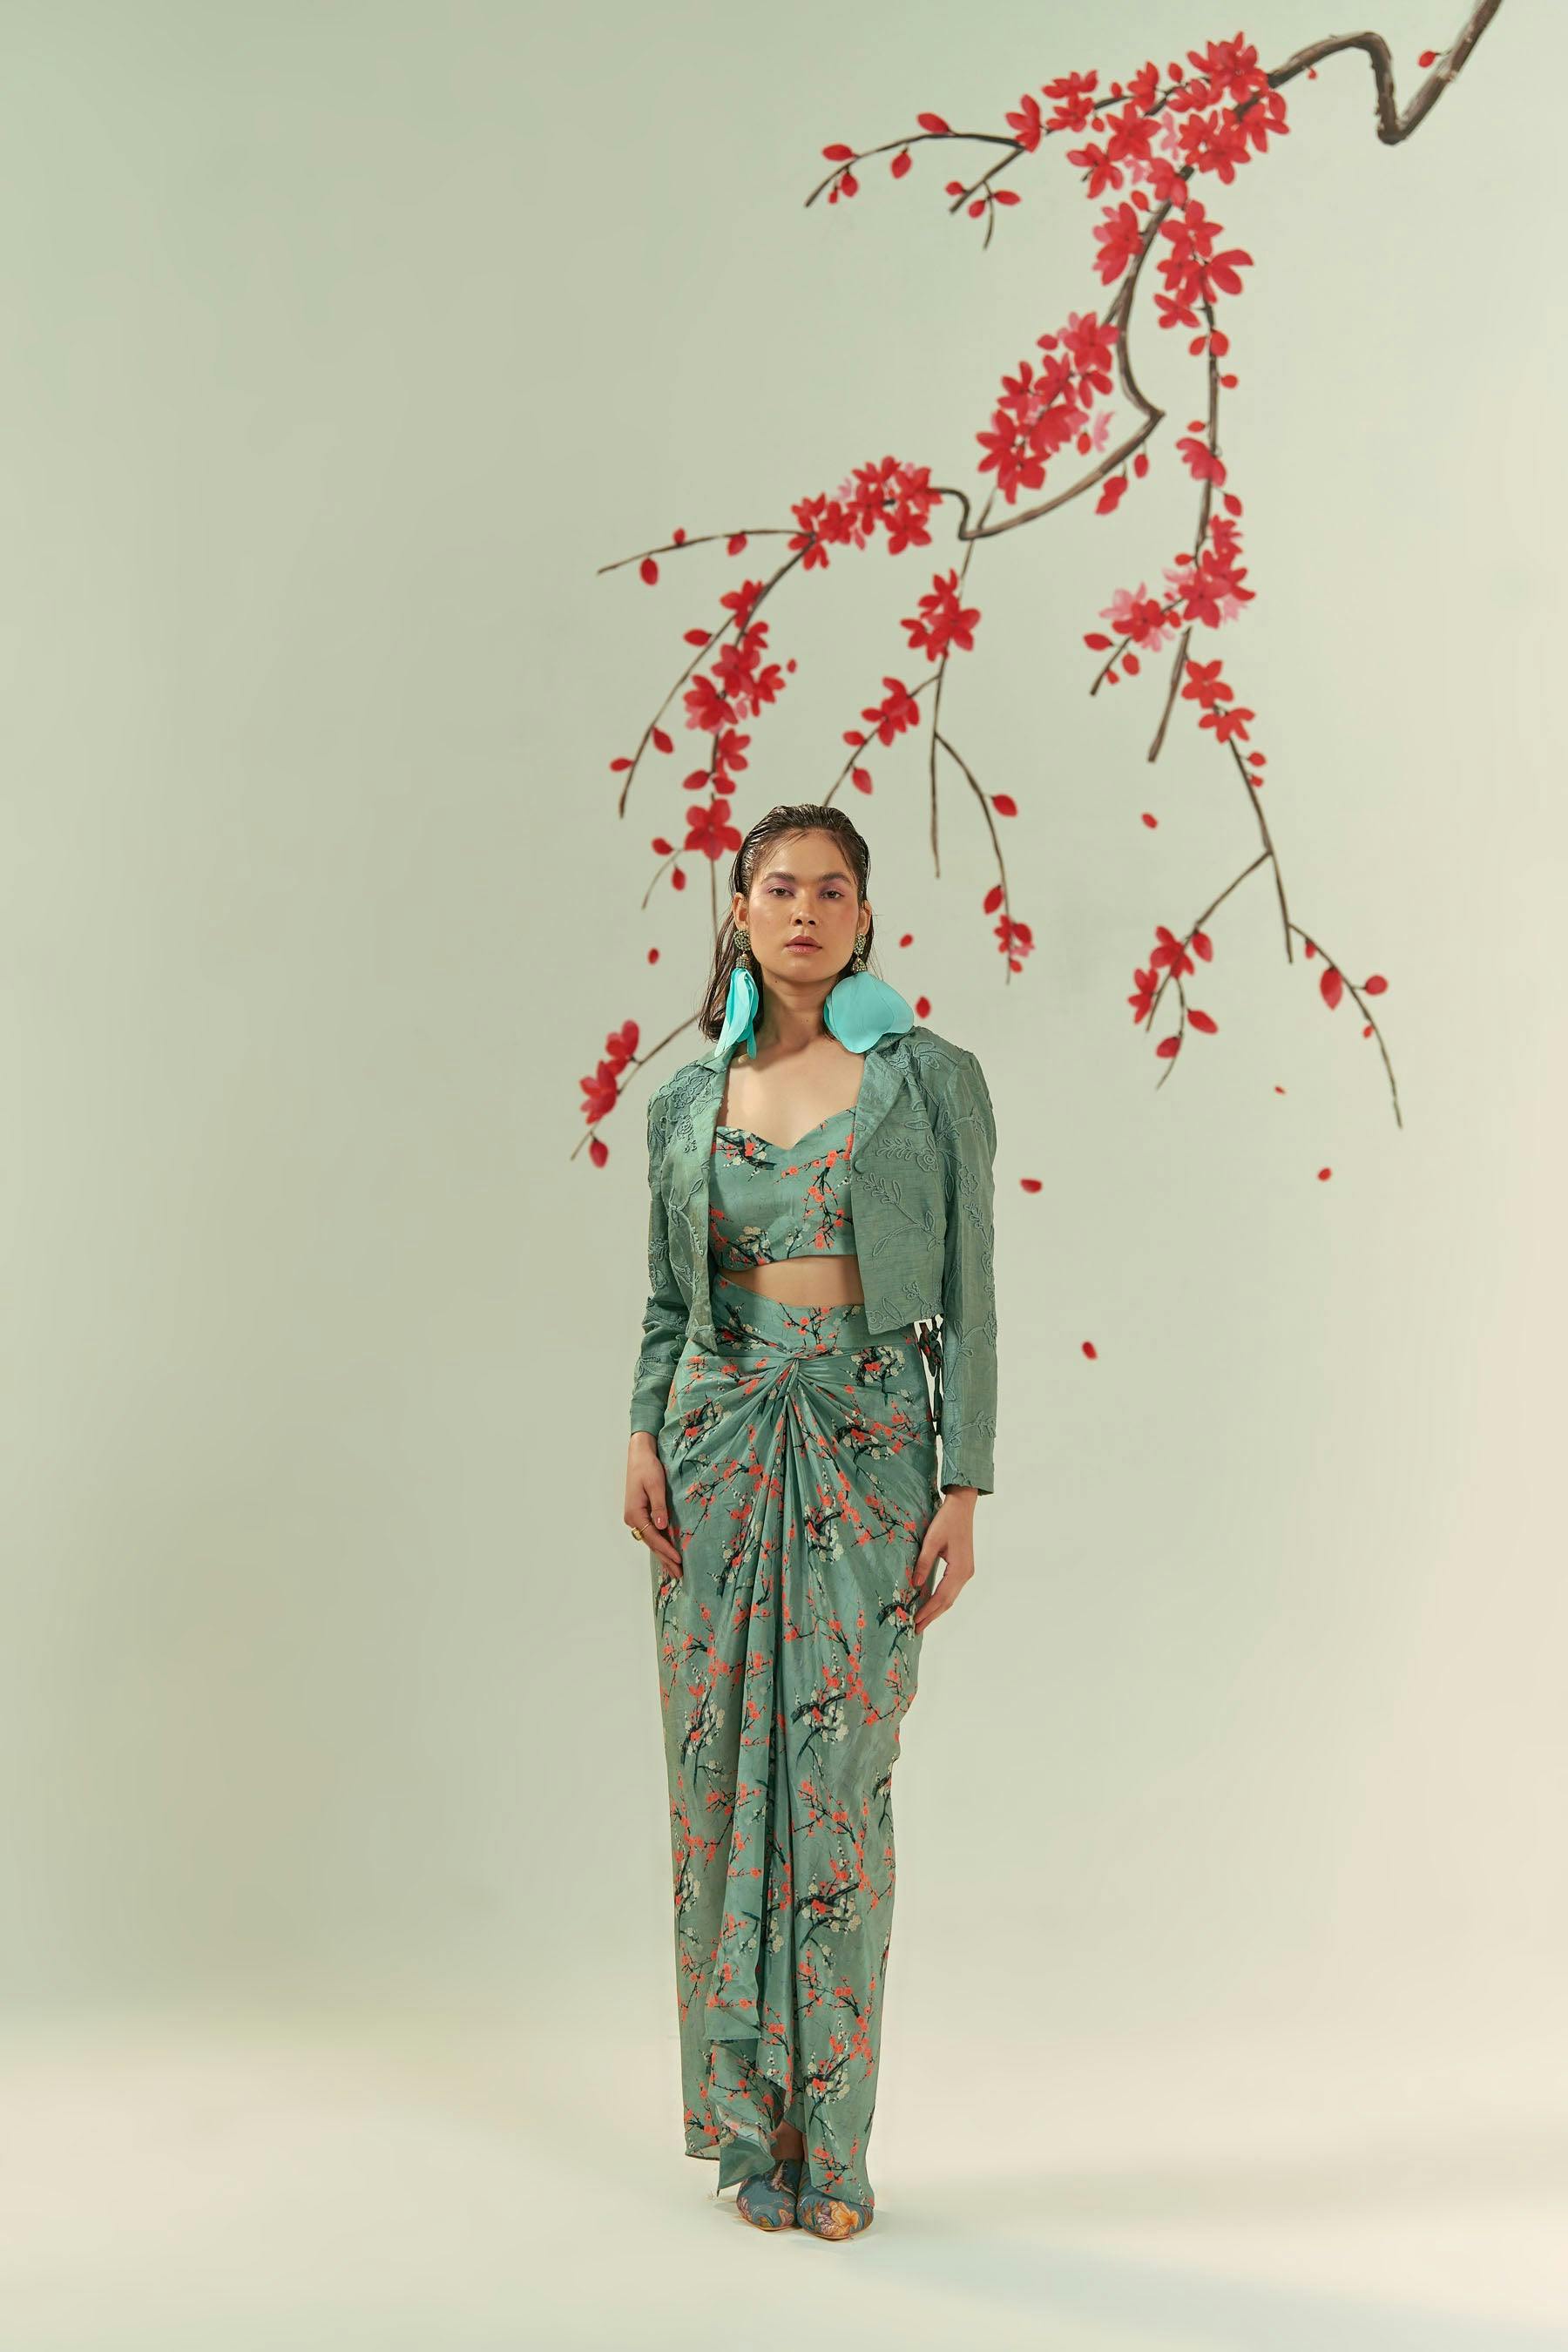 Kaze Embroidered Blazer With Printed Bustier And Skirt Co-ord Set, a product by COEUR by Ankita Khurana